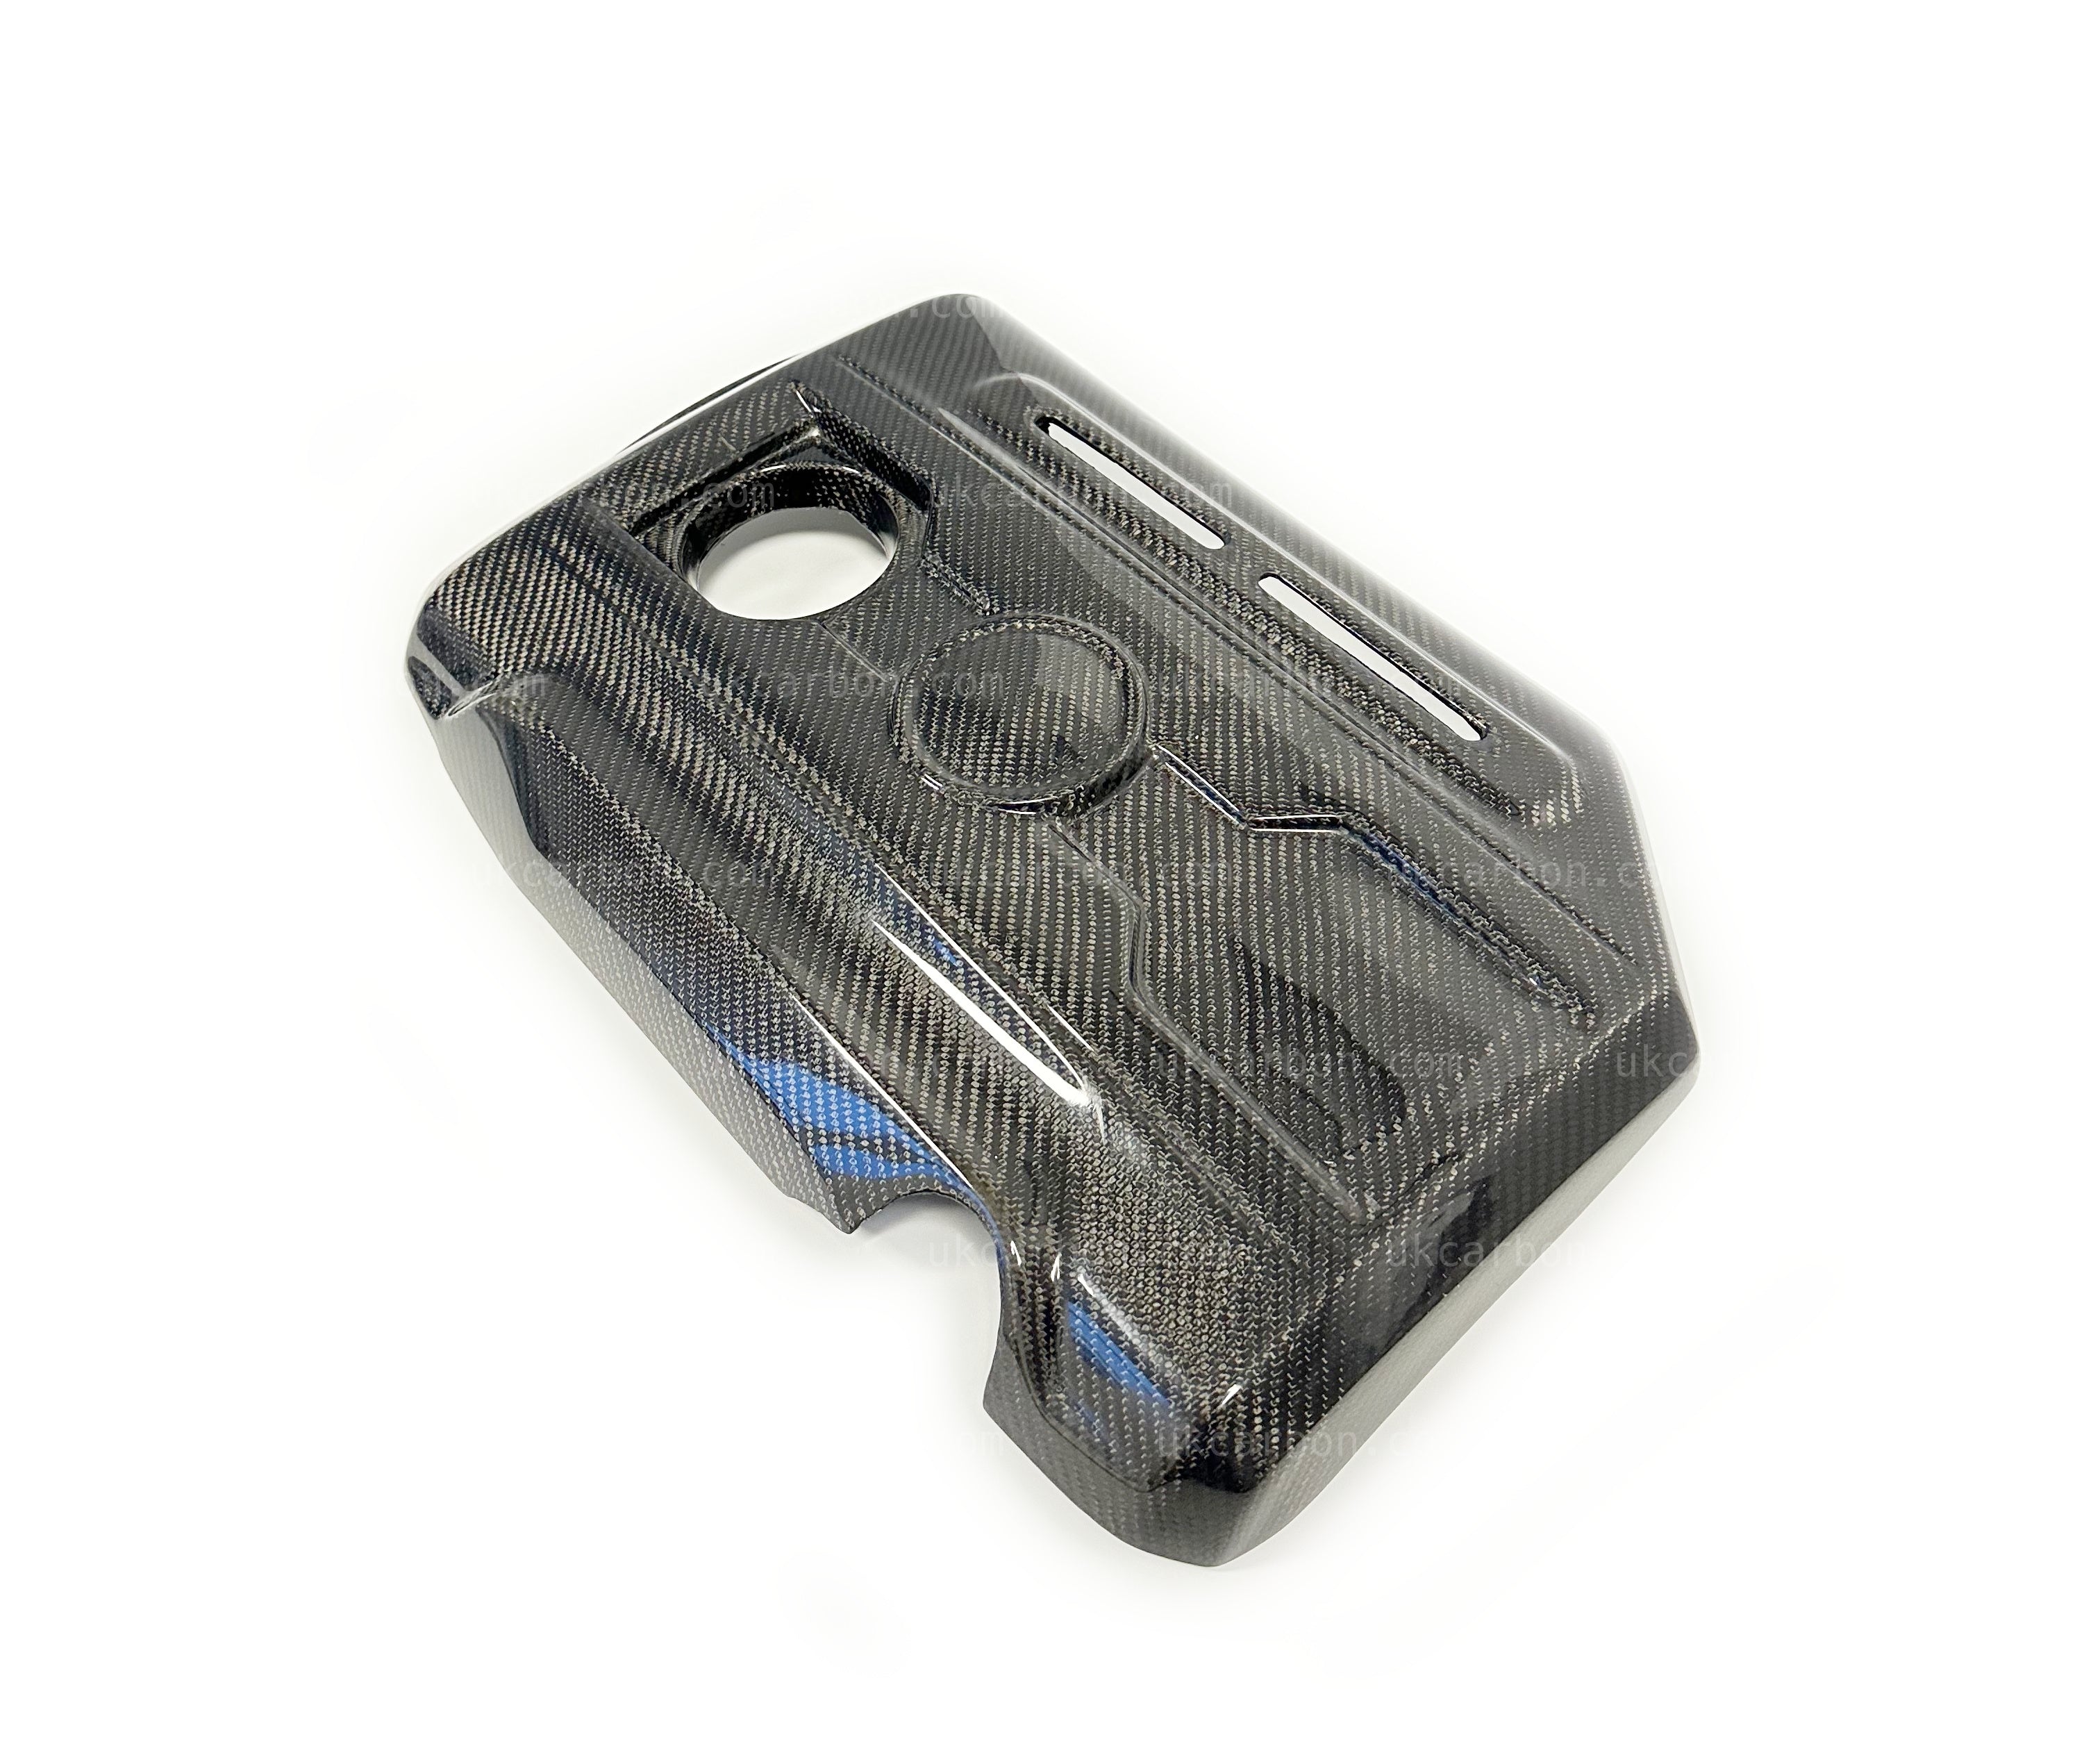 Volkswagen VW Golf GTI MK6 Carbon Fibre Engine Cover Replacement by UKCarbon